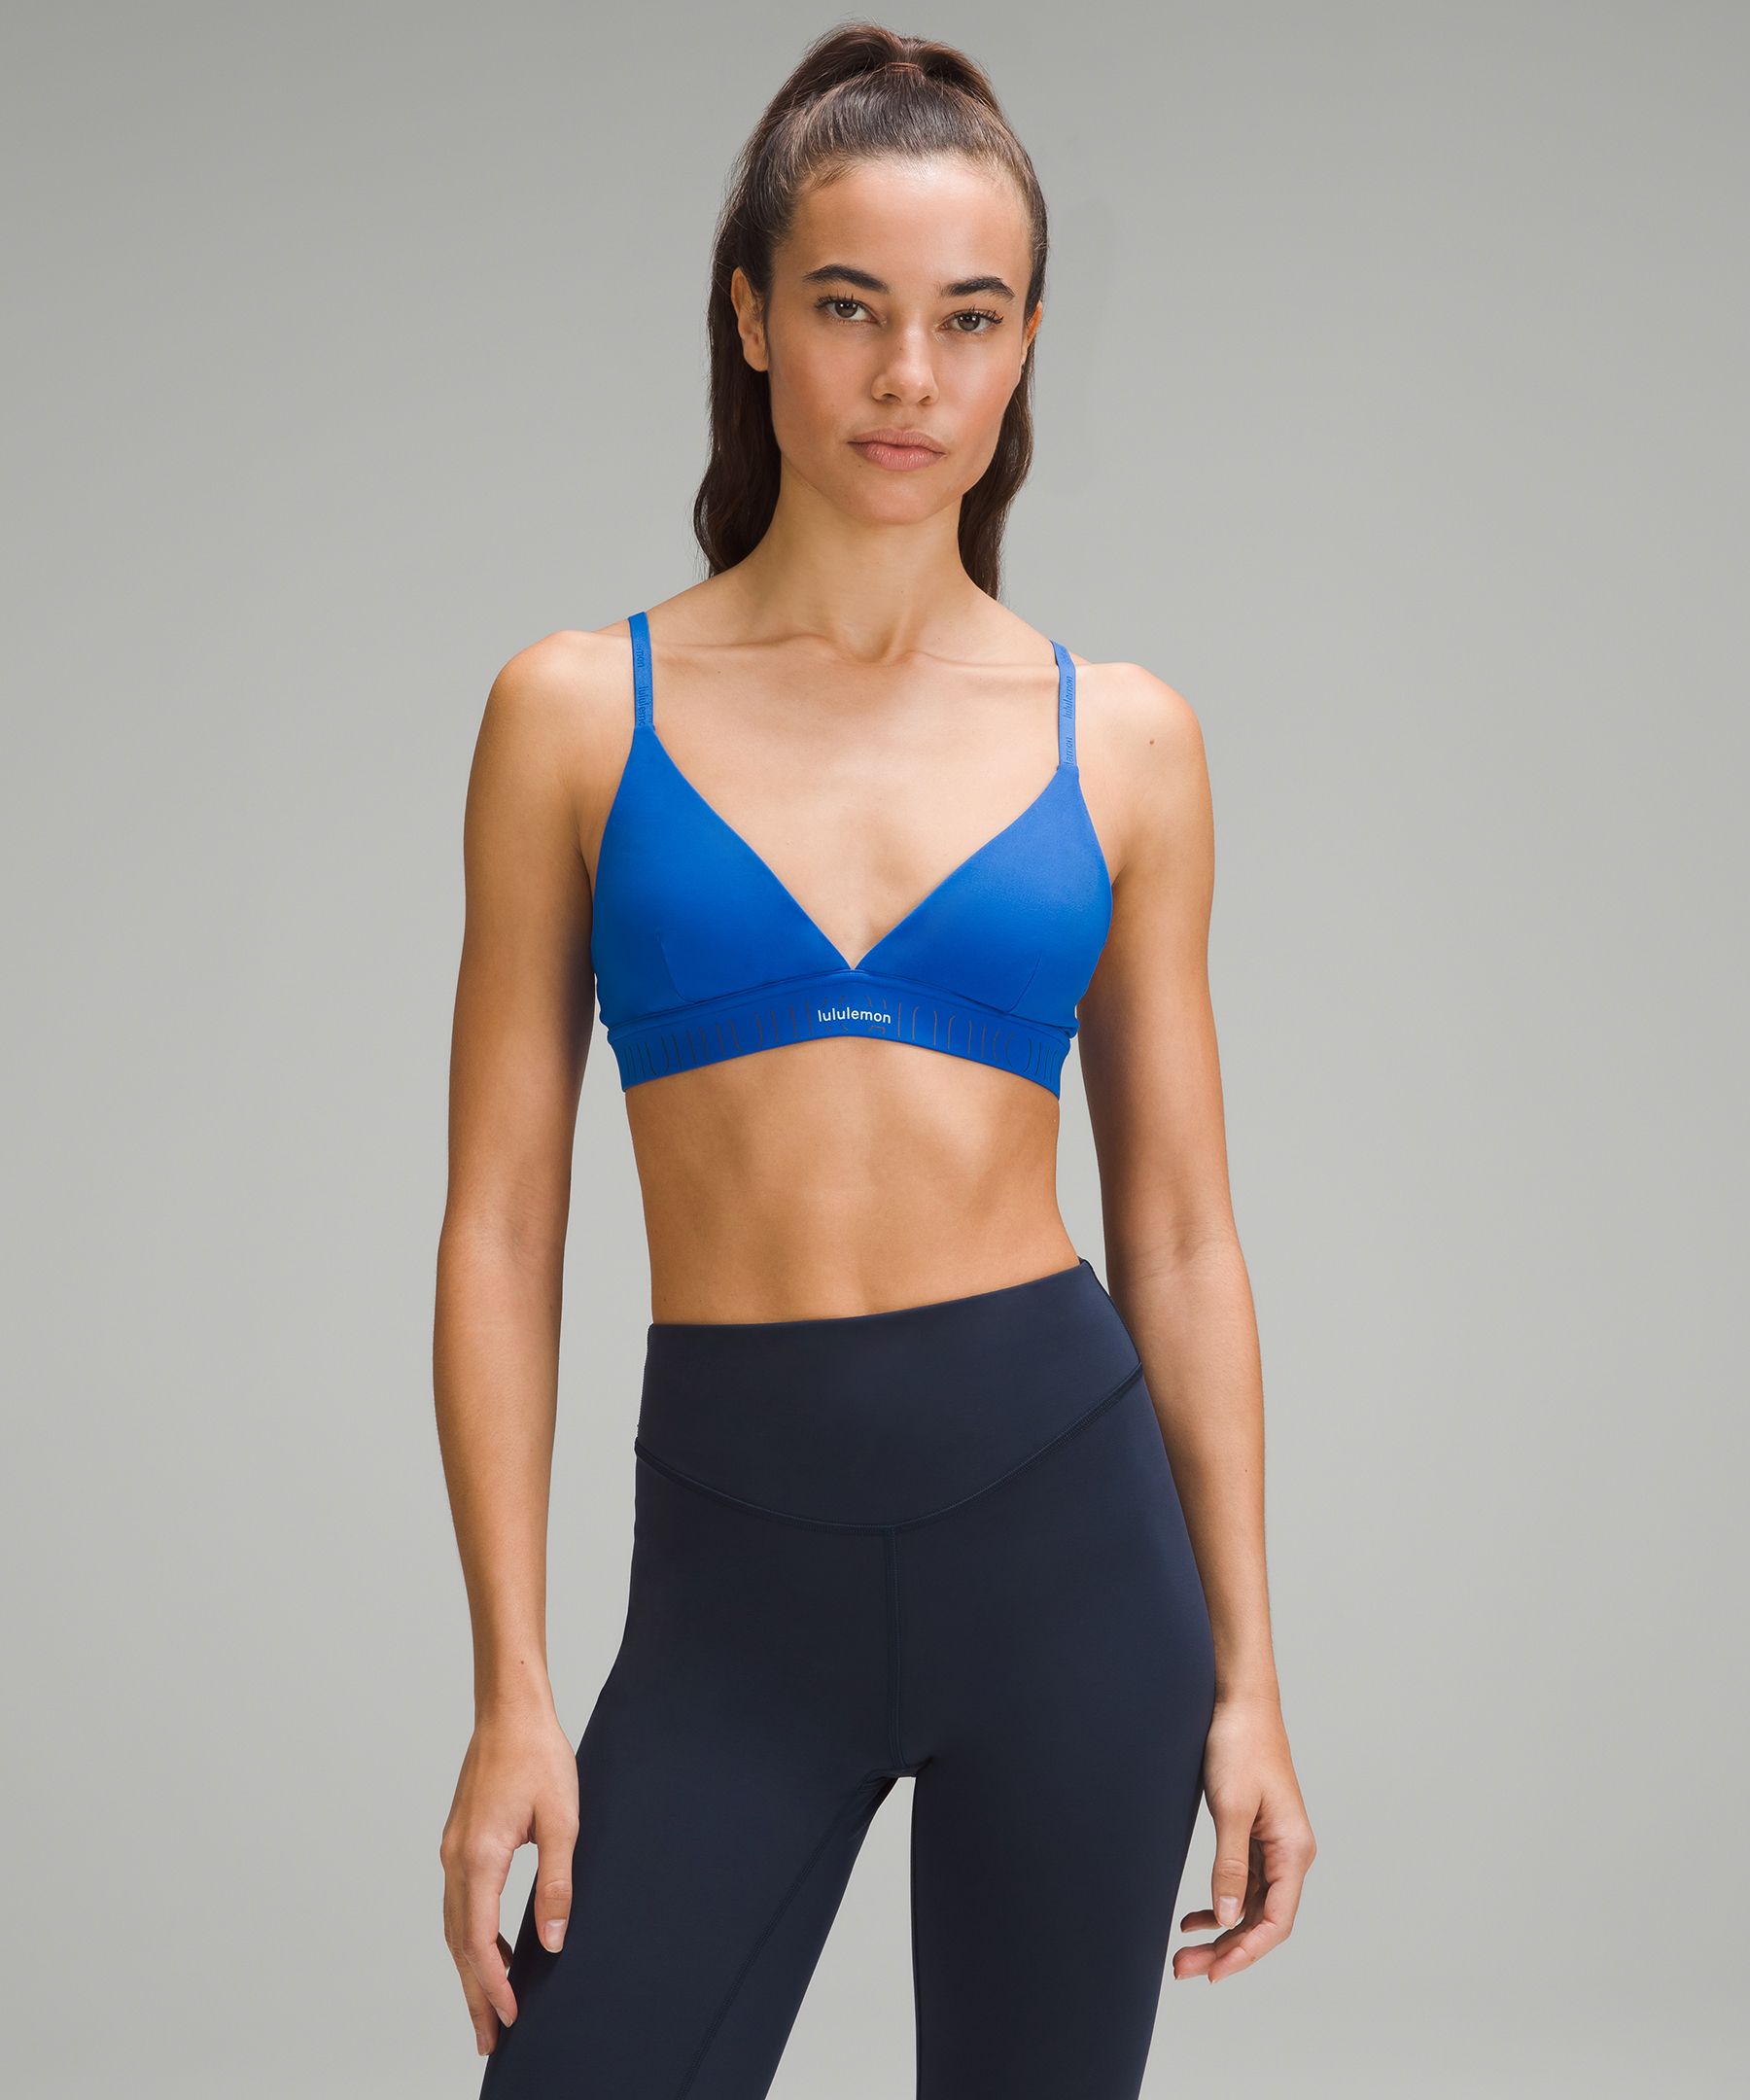 Lululemon athletica License to Train Triangle Bra Light Support, A/B Cup  *Logo, Women's Bras